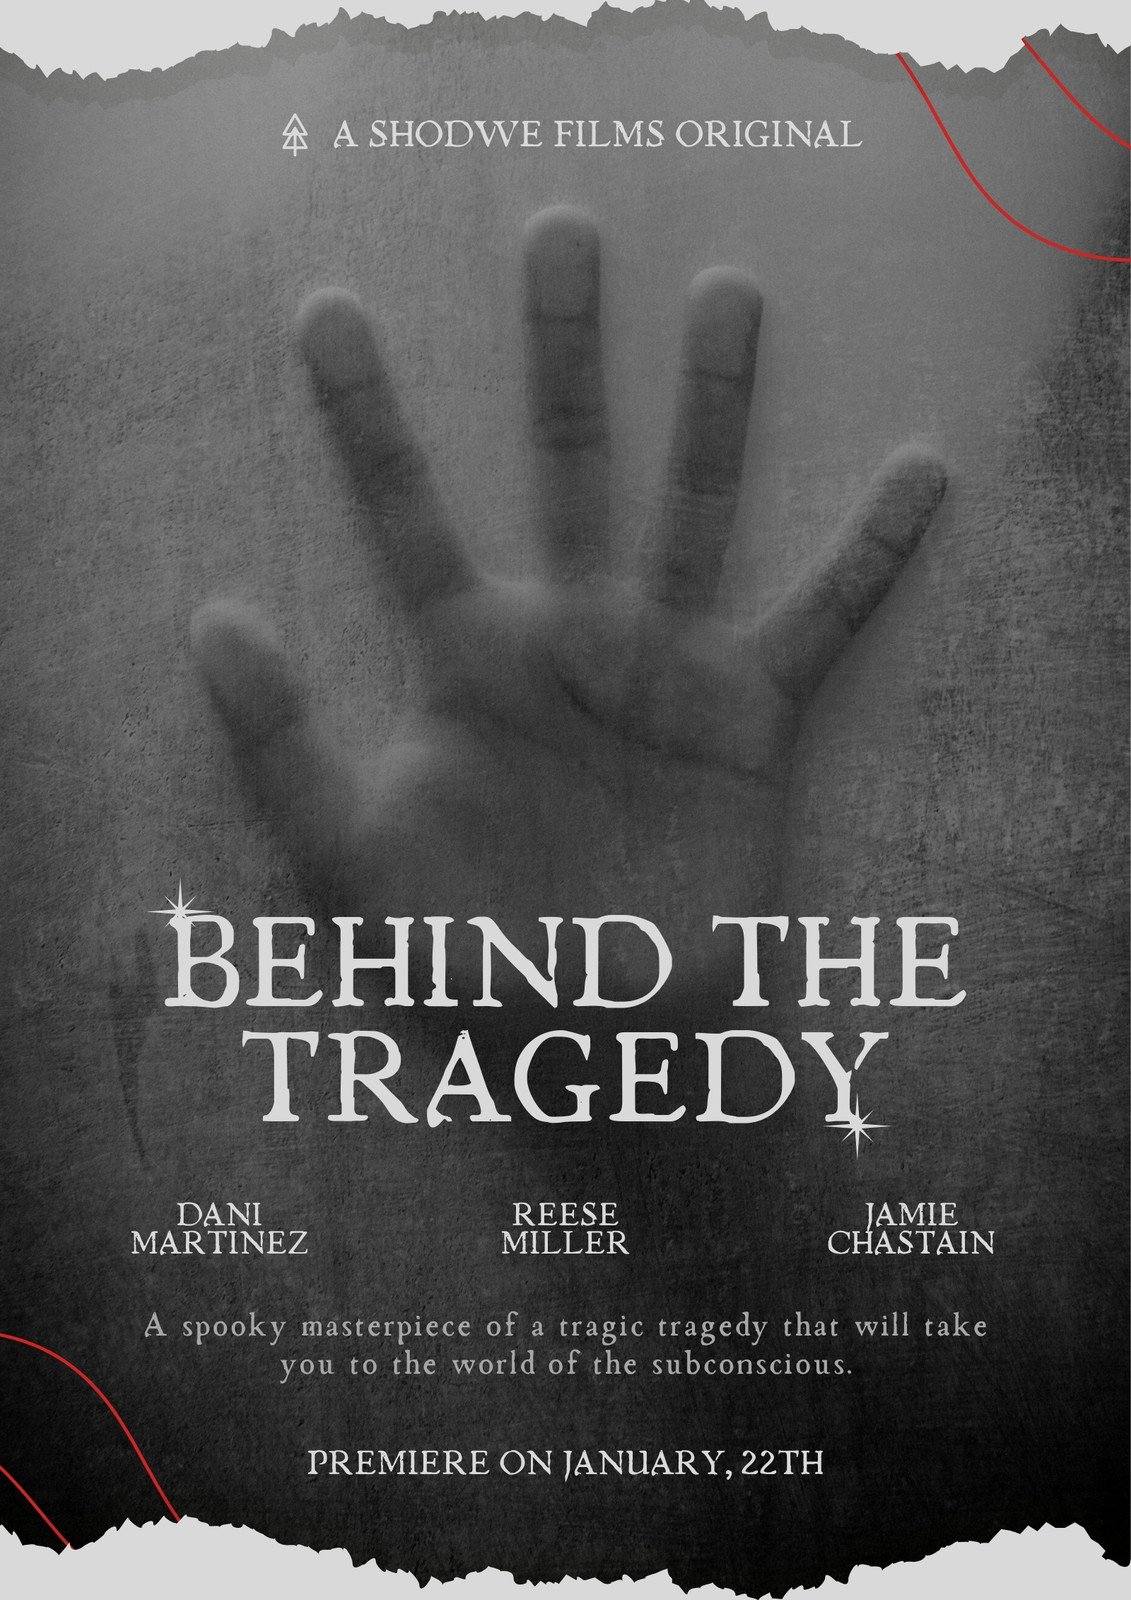 Black and Gray Modern Film Behind The Tragedy Poster